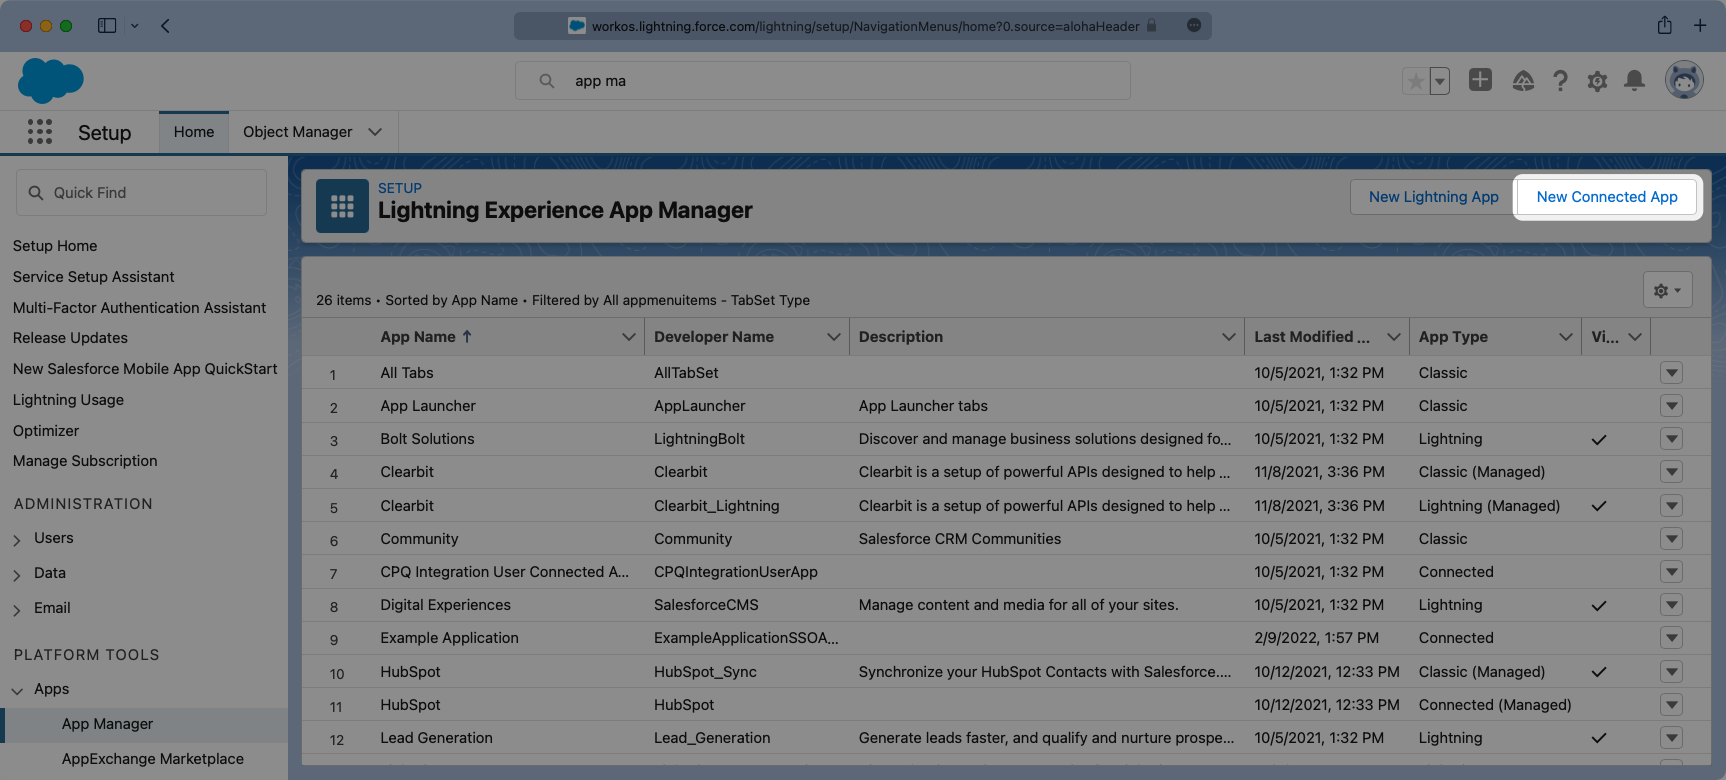 A screenshot showing how to create a new Connected App in the Salesforce dashboard.